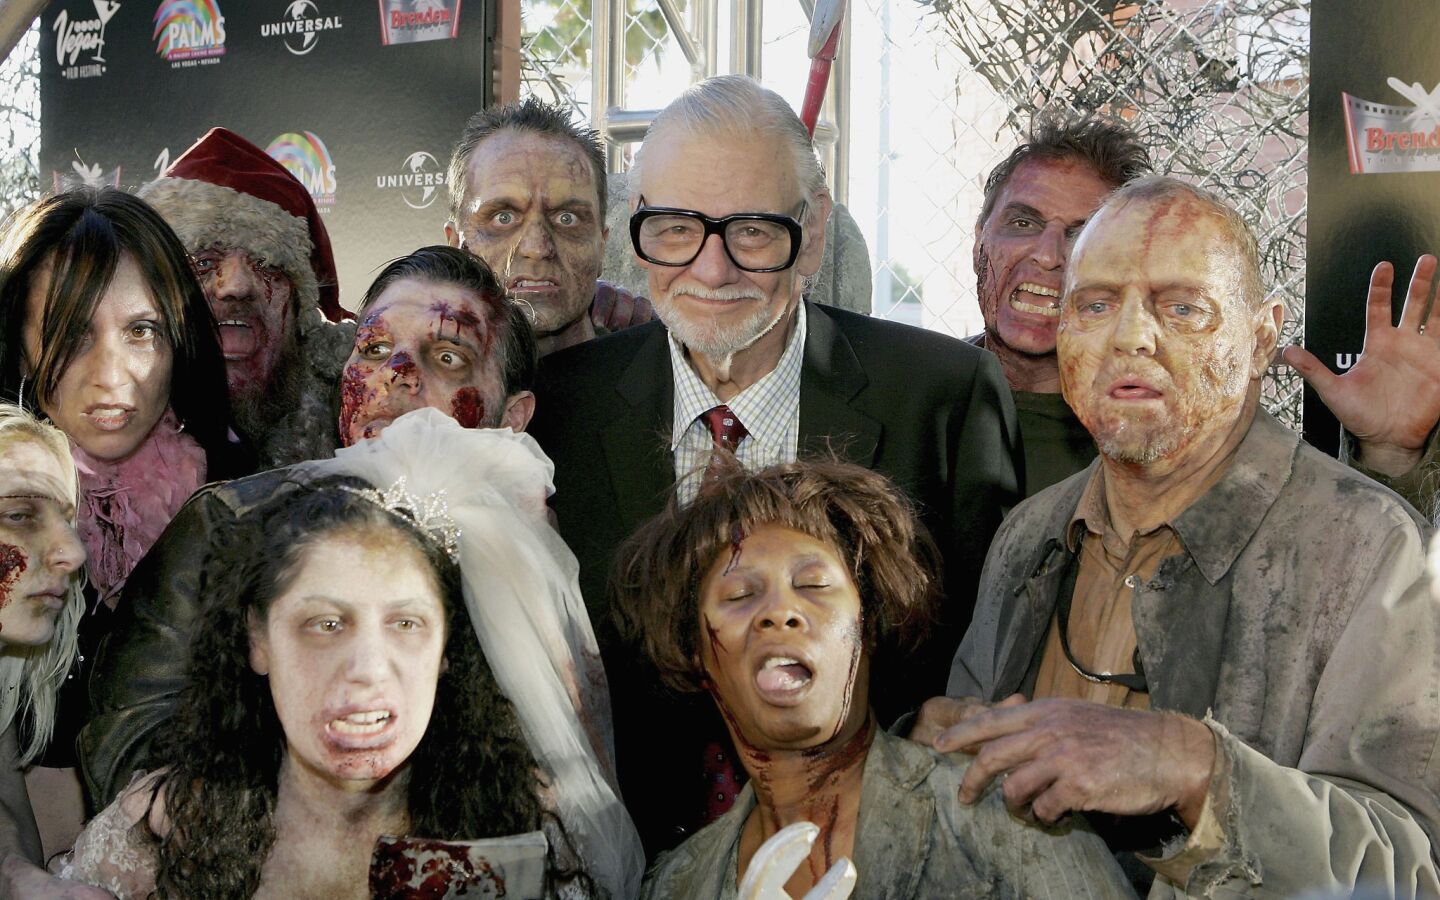 Director George Romero is surrounded by actors dressed as zombies at the world premiere of his movie "Land of the Dead" in Las Vegas in 2005.